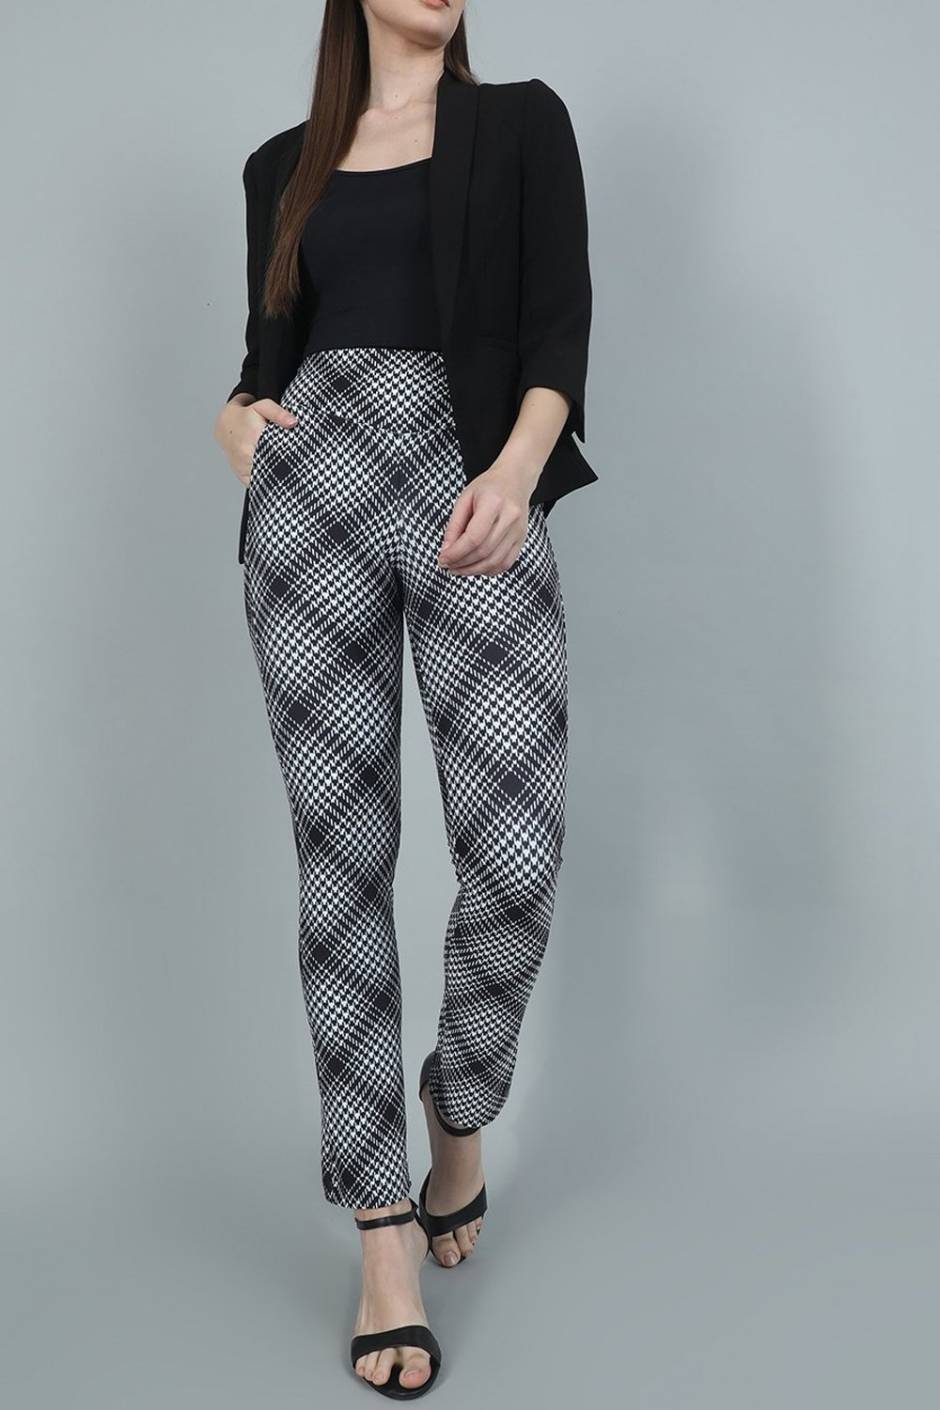 SDCVRE straight trousers Autumn And Winter Thick Warm Checkered Pants Plaid  Straight-leg Student Thick Trousers Women Casual High-waist Wide-leg  Pan,black and whiet,China : Amazon.co.uk: Fashion